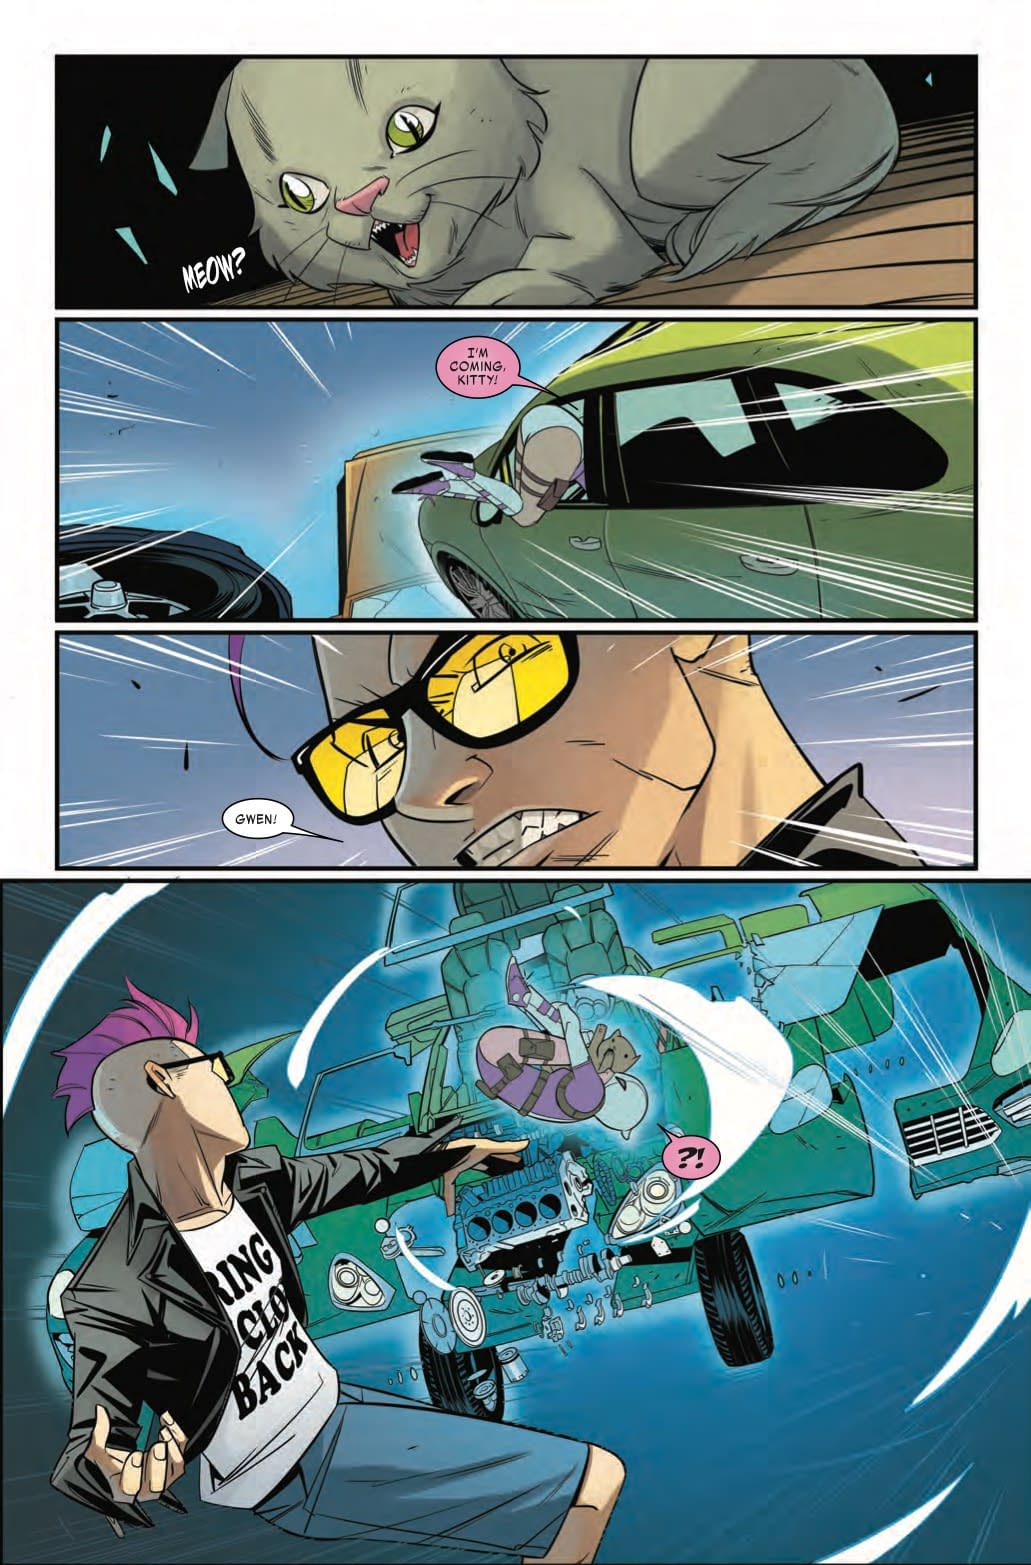 The West Coast Avengers Get a Purrfect New Member in Next Week's WCA #5